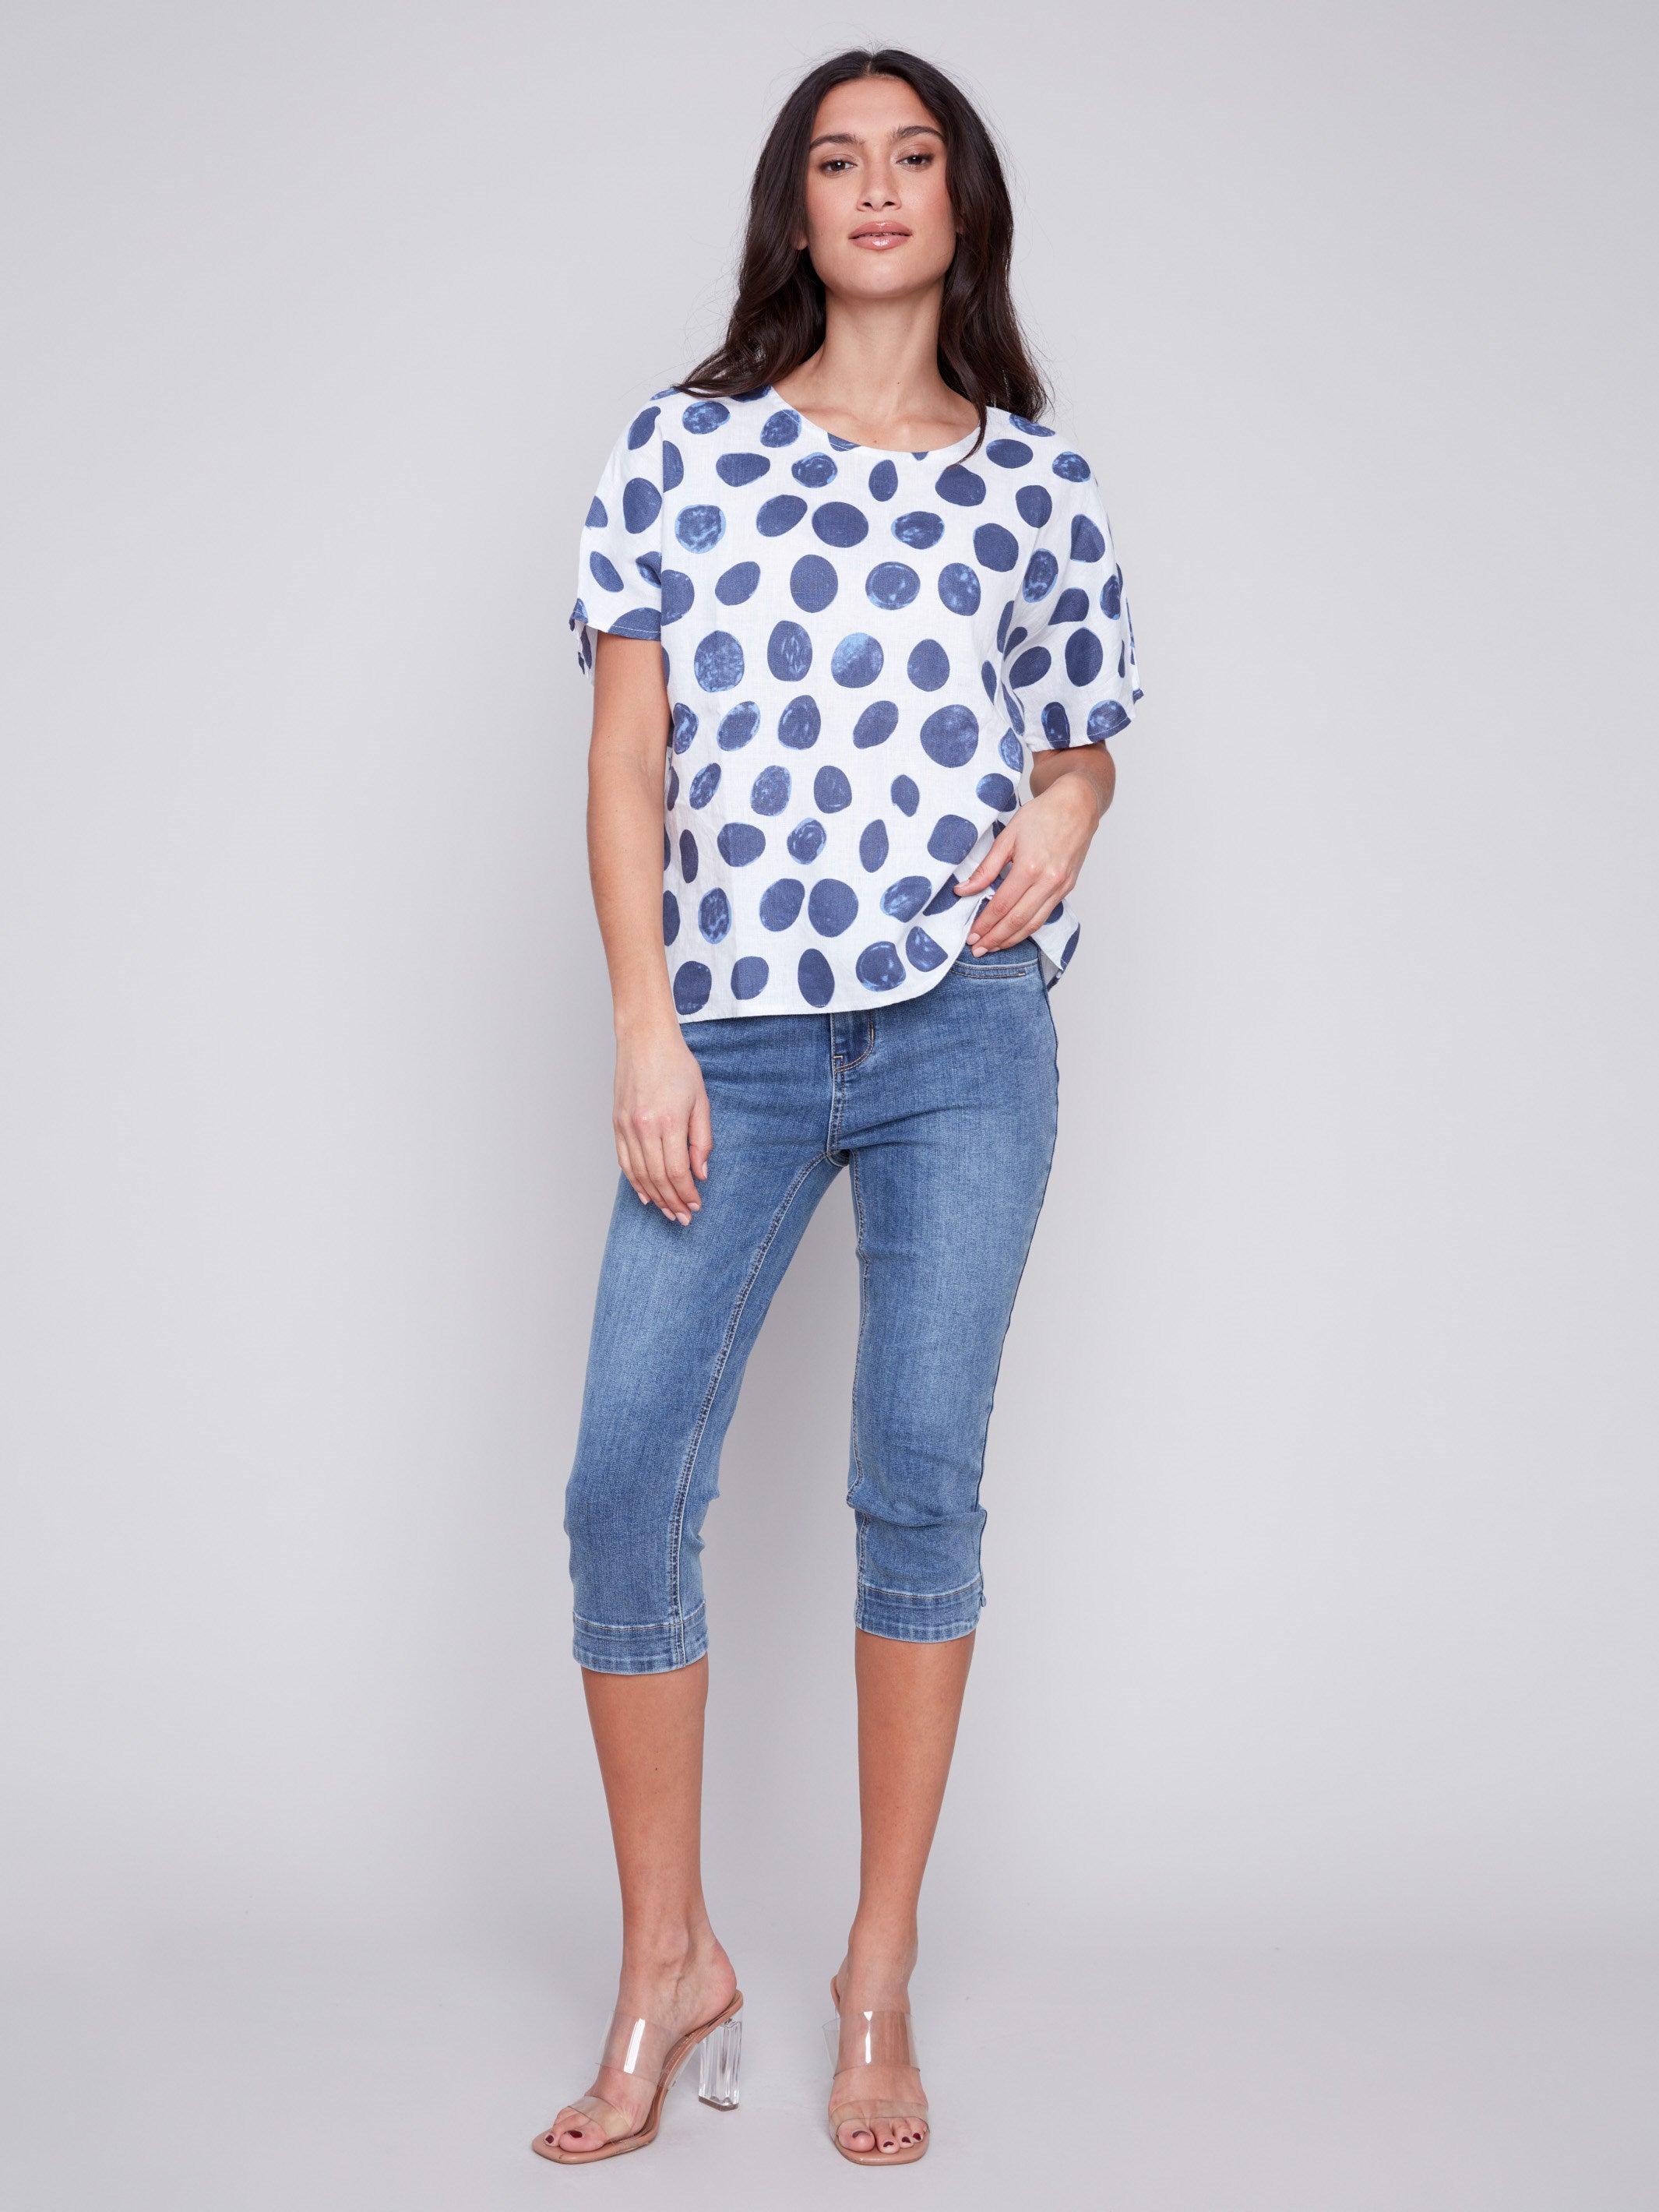 Printed Linen Dolman Top - Dots - Charlie B Collection Canada - Image 4